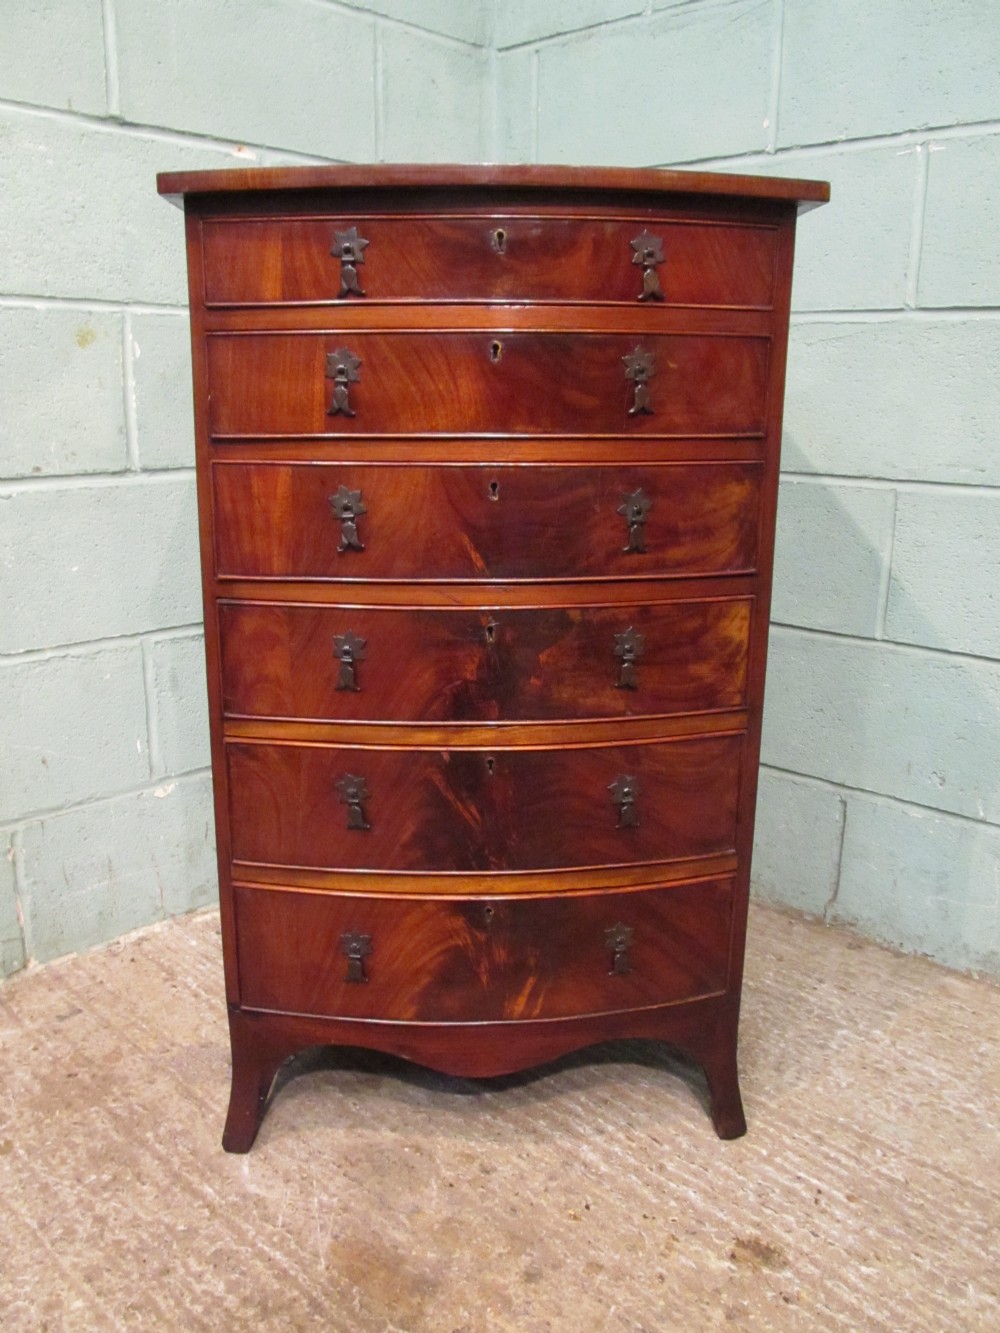 antique edwardian flamed mahogany narrow bow front chest of drawers c1900